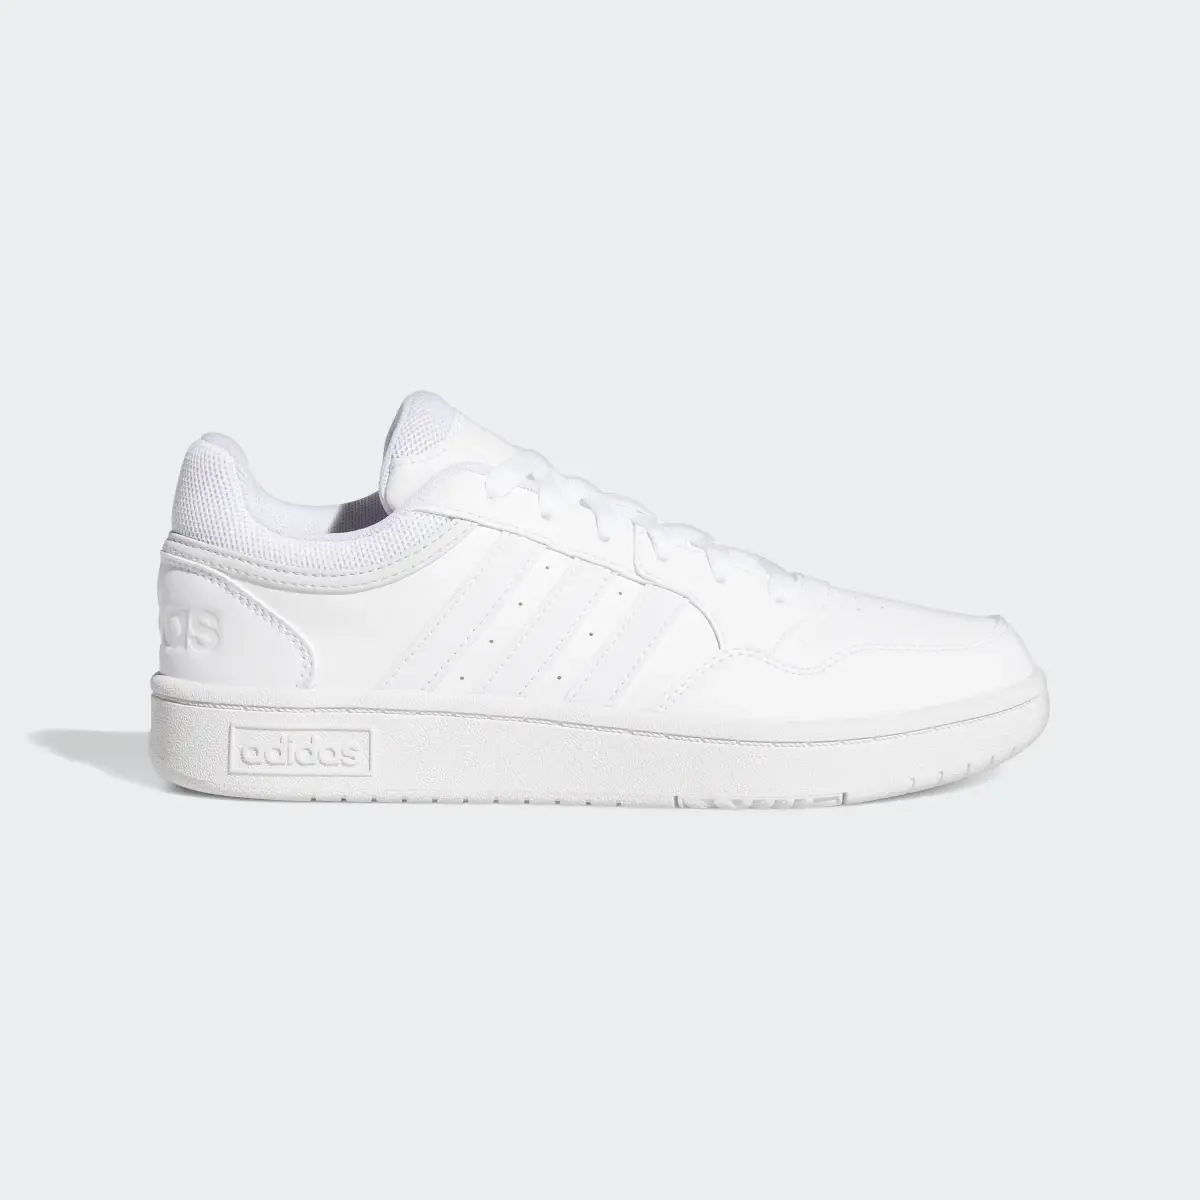 Adidas Hoops 3.0 Low Classic Shoes. 2